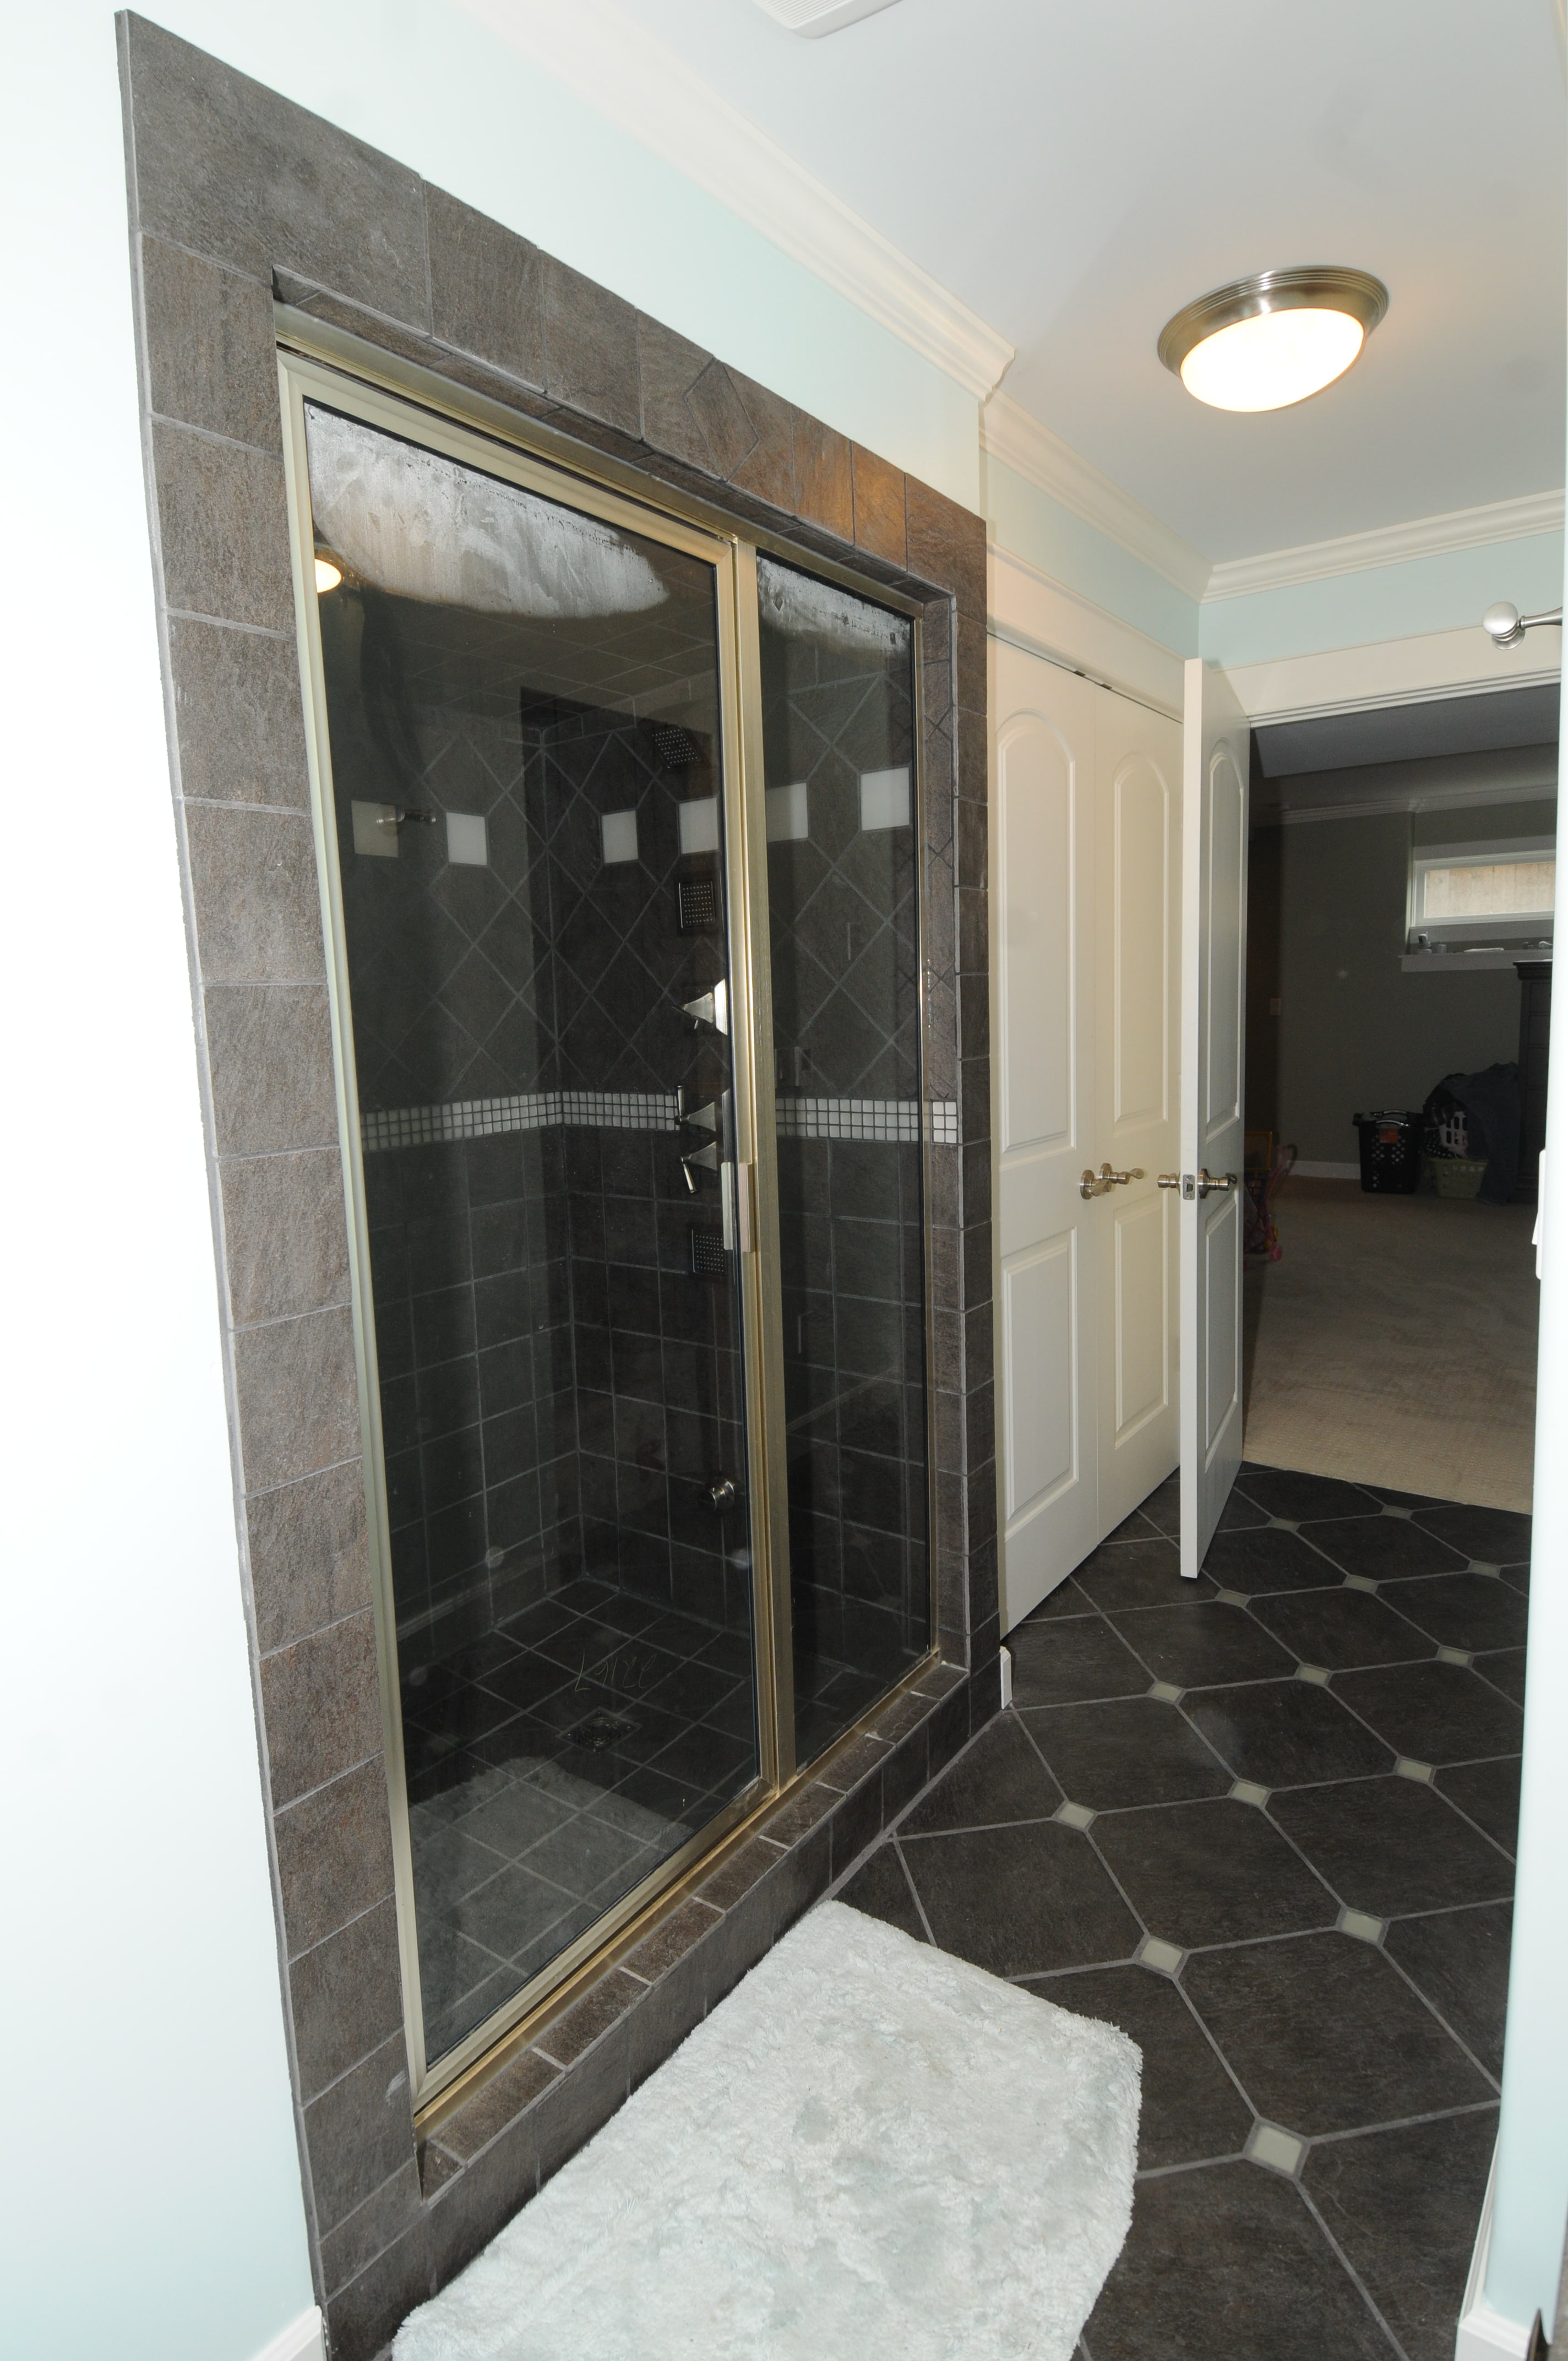 Steam shower at the newly-renovated Mavis Home